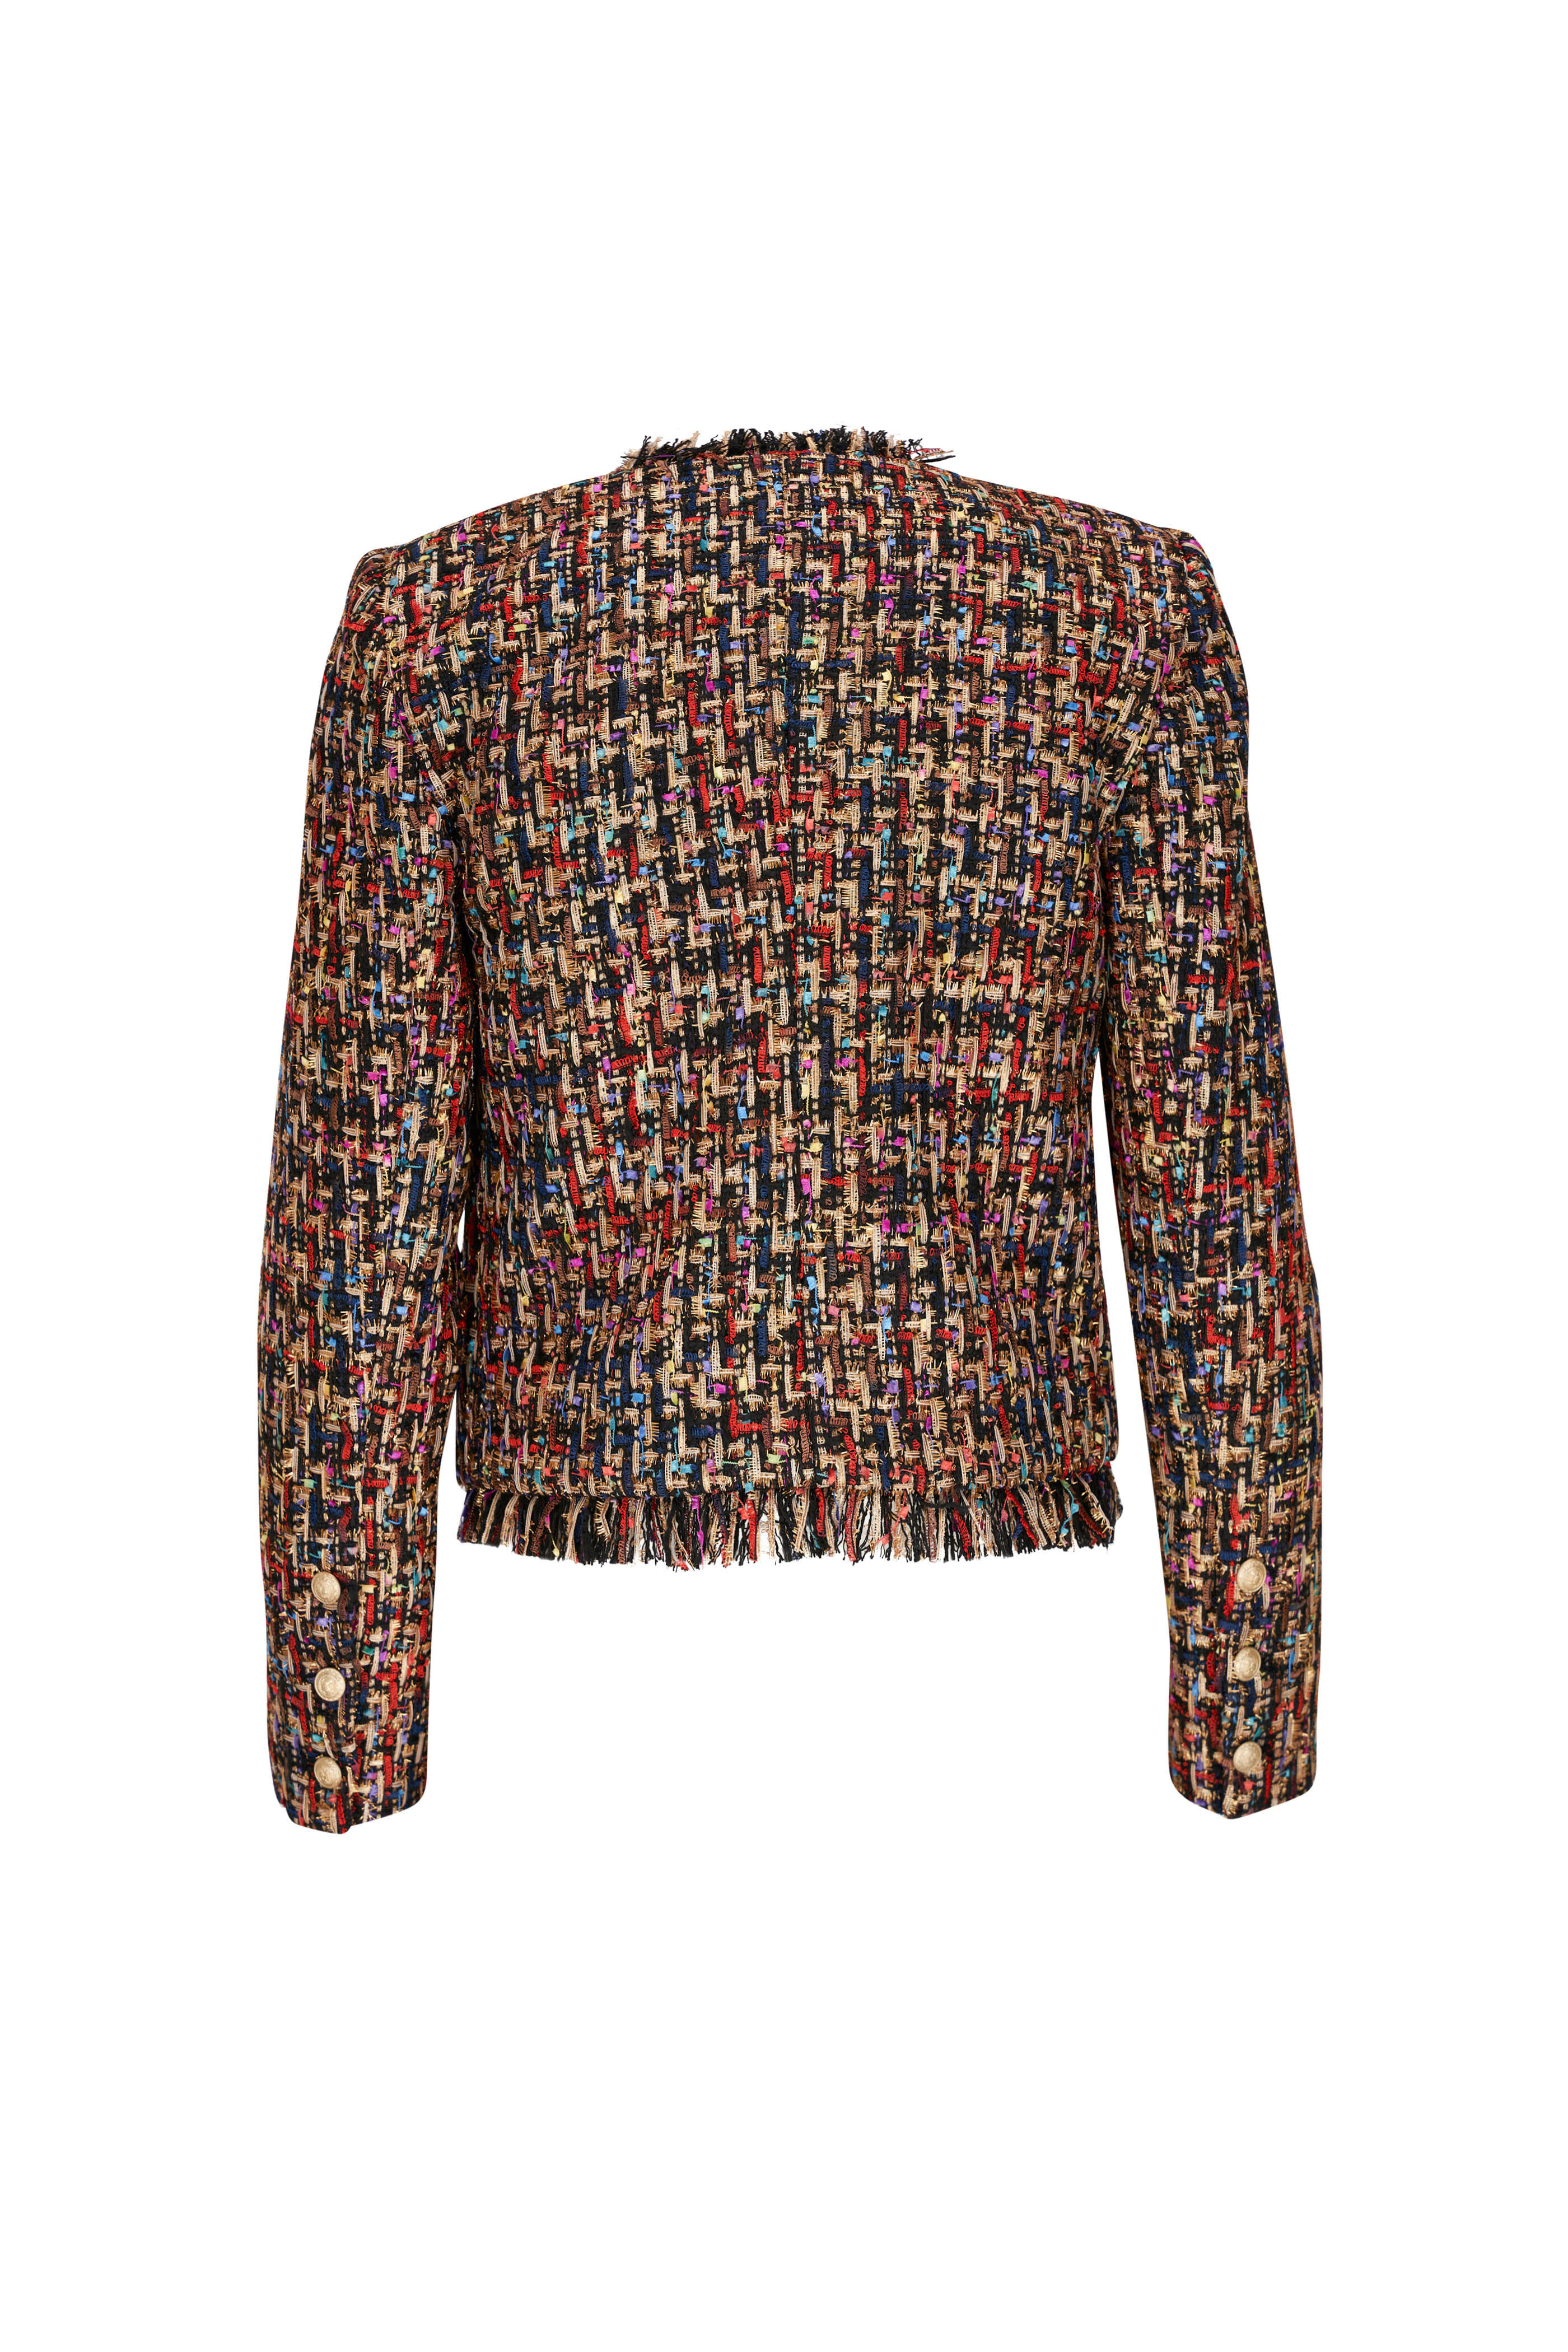 L'Agence - Angelina Multicolor Tweed Blazer | Mitchell Stores